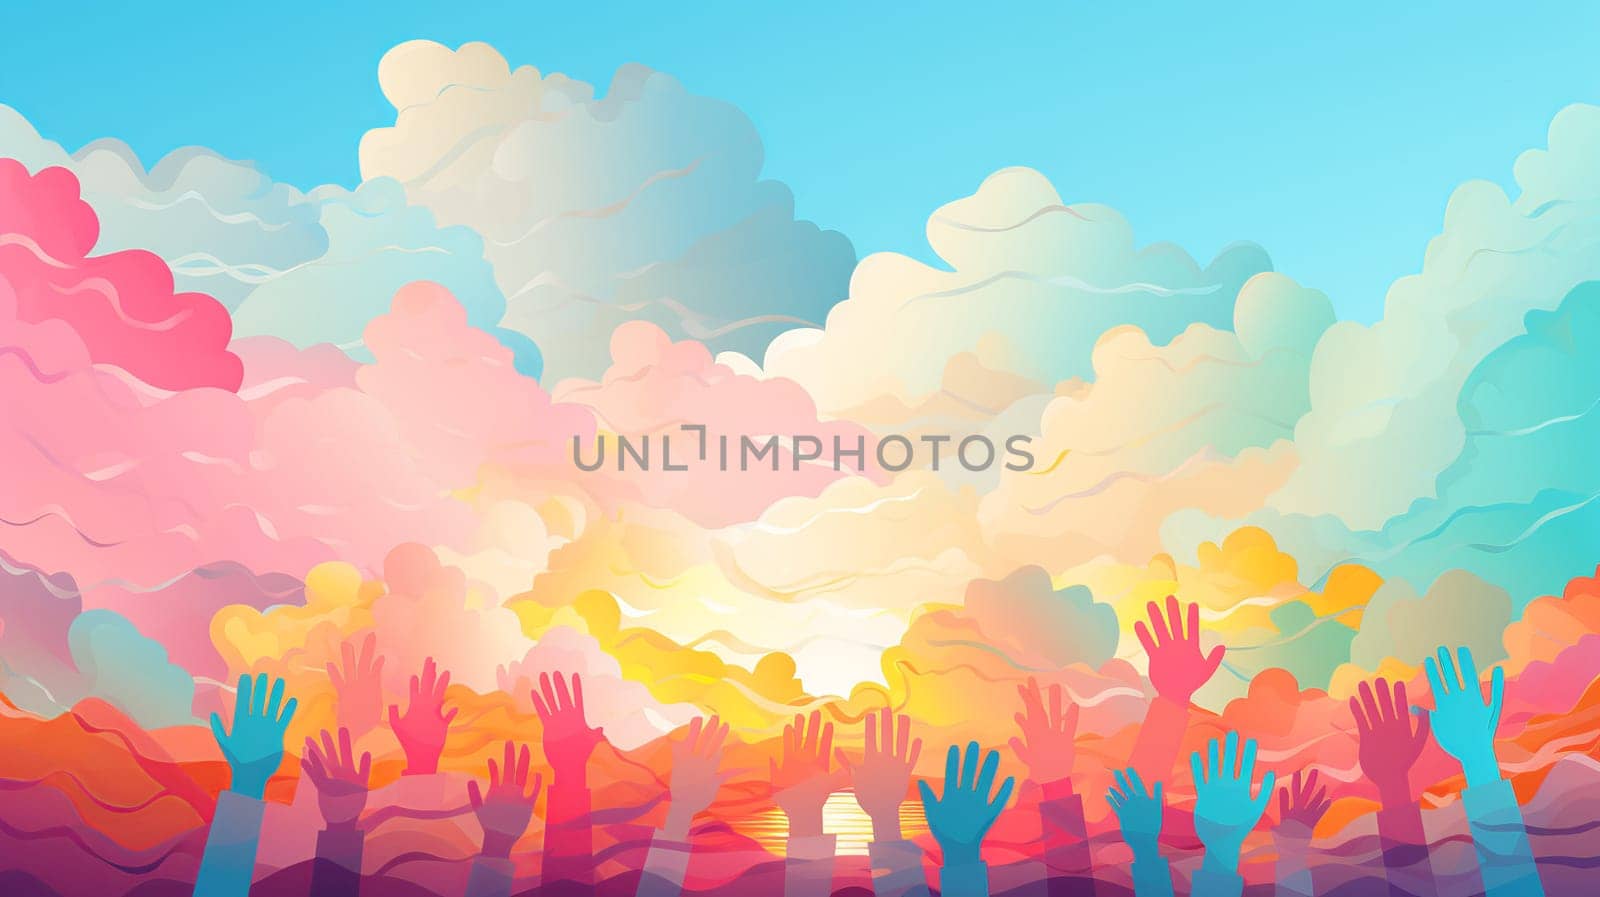  group of small children's hands Rainbow color wallpaper background Generate AI by Mrsongrphc